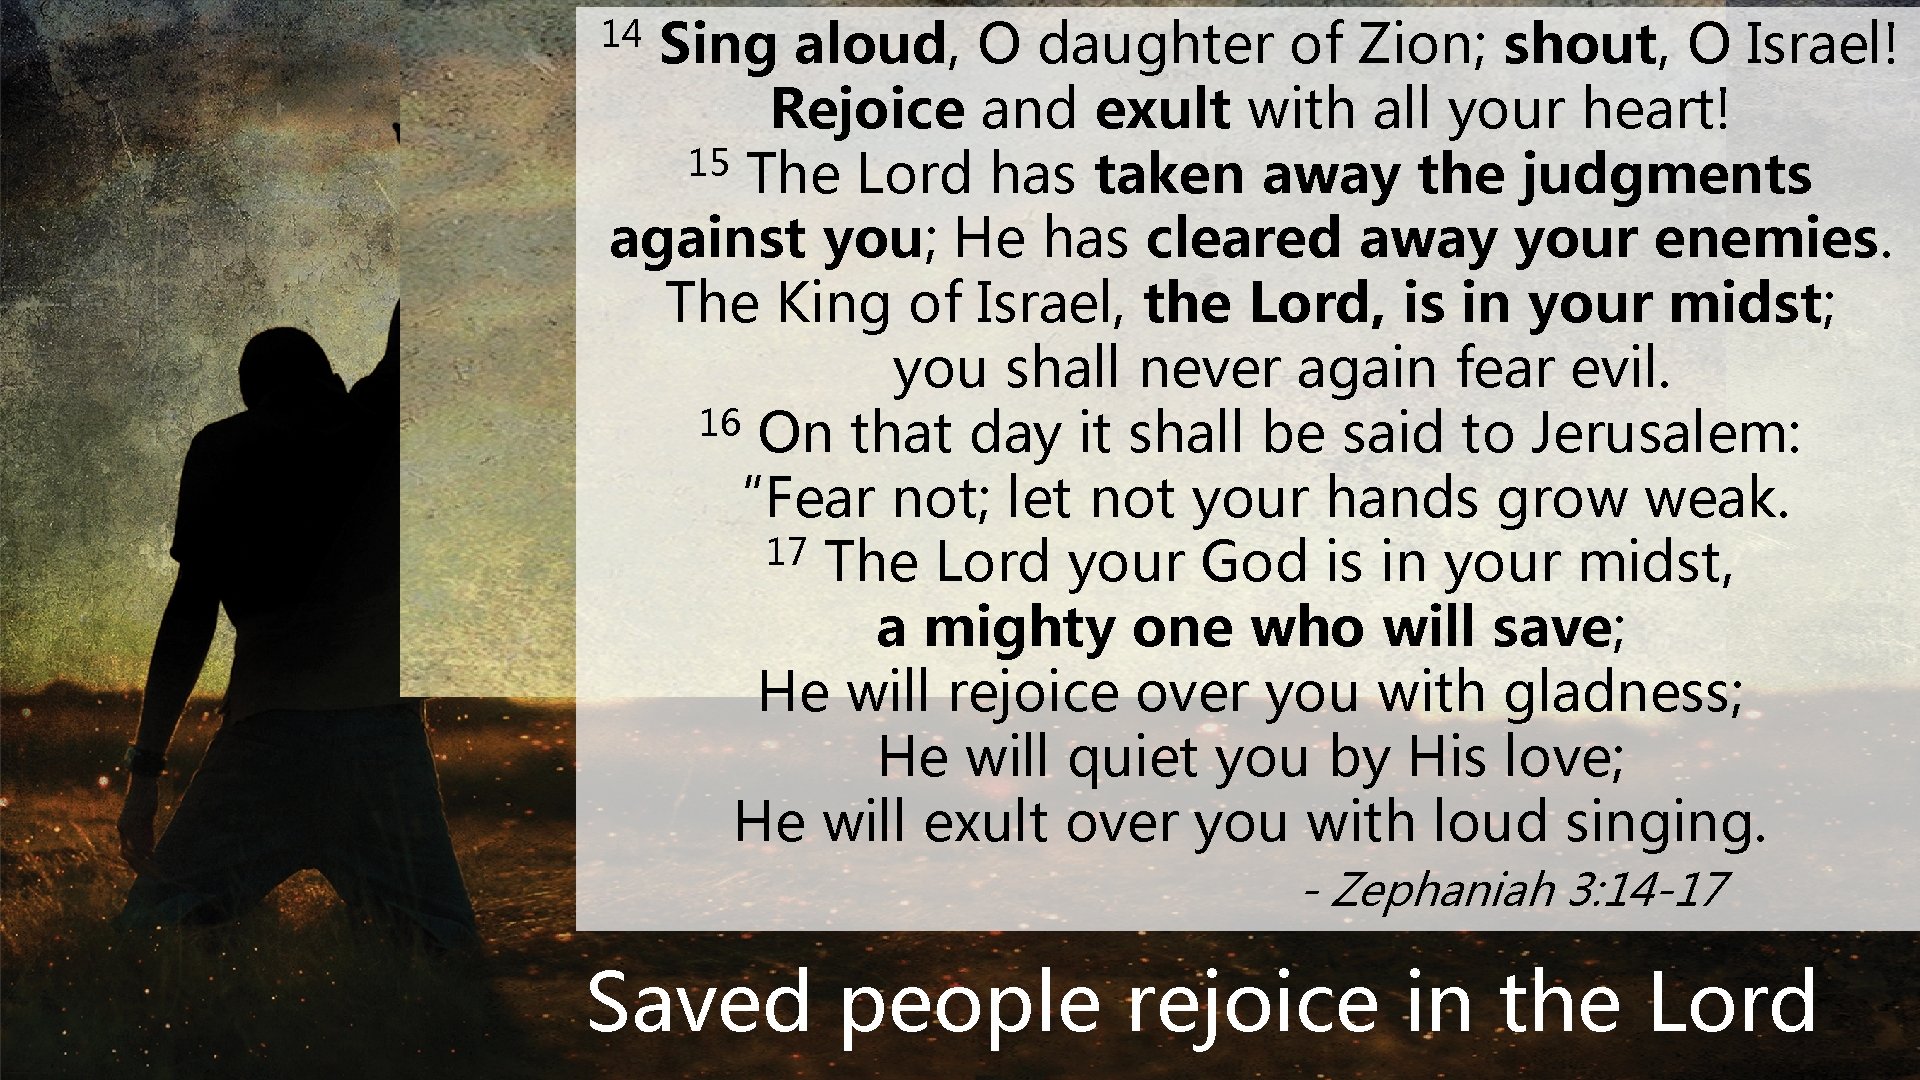 Sing aloud, O daughter of Zion; shout, O Israel! Rejoice and exult with all